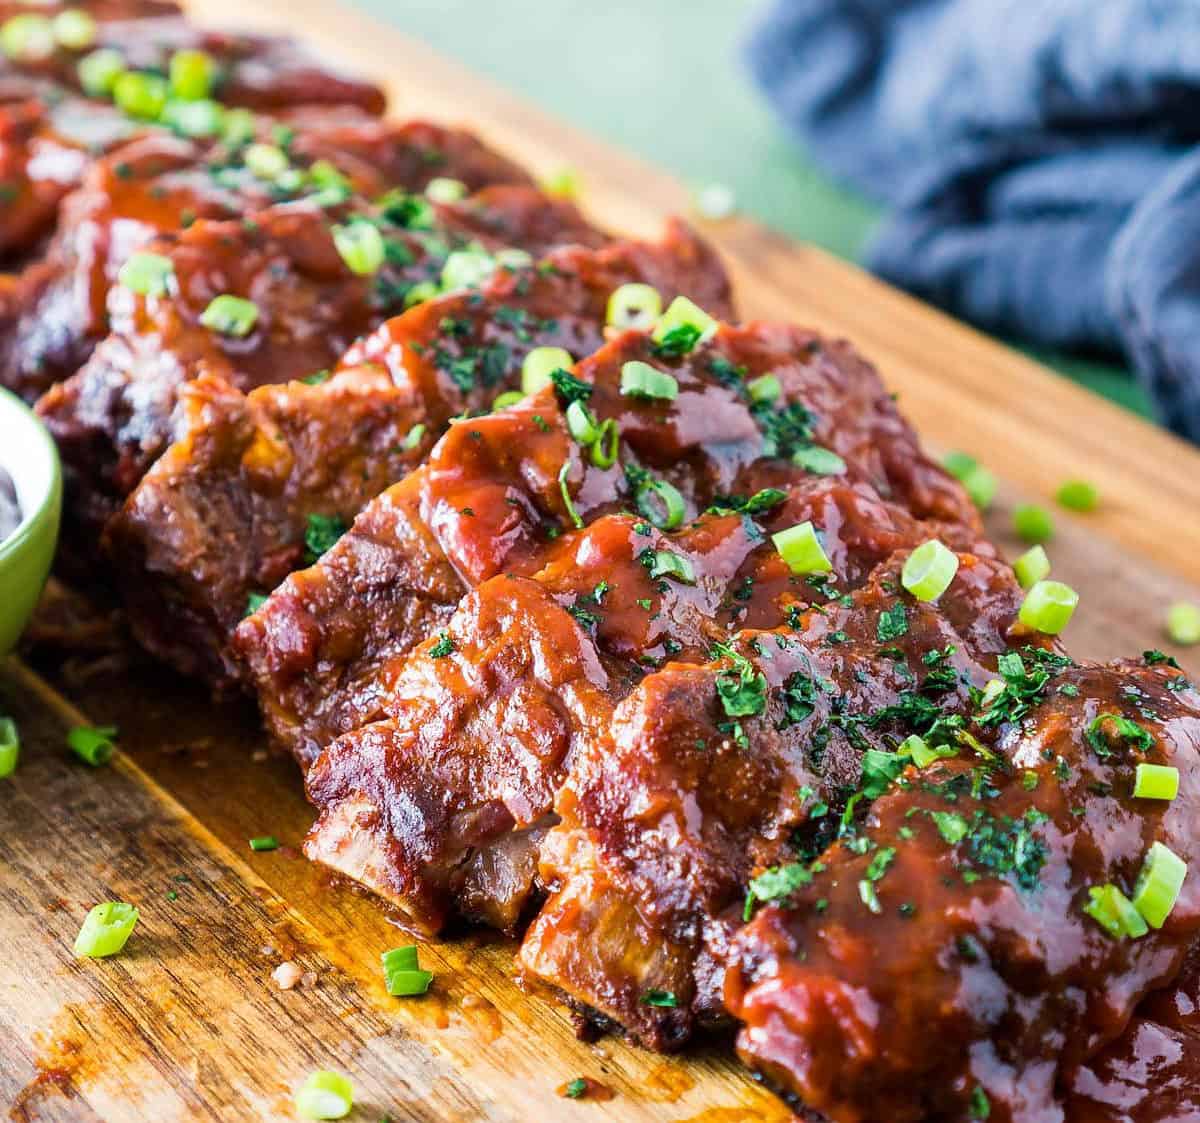 Low & Slow Oven Baked Ribs – Super Simple! Recipe